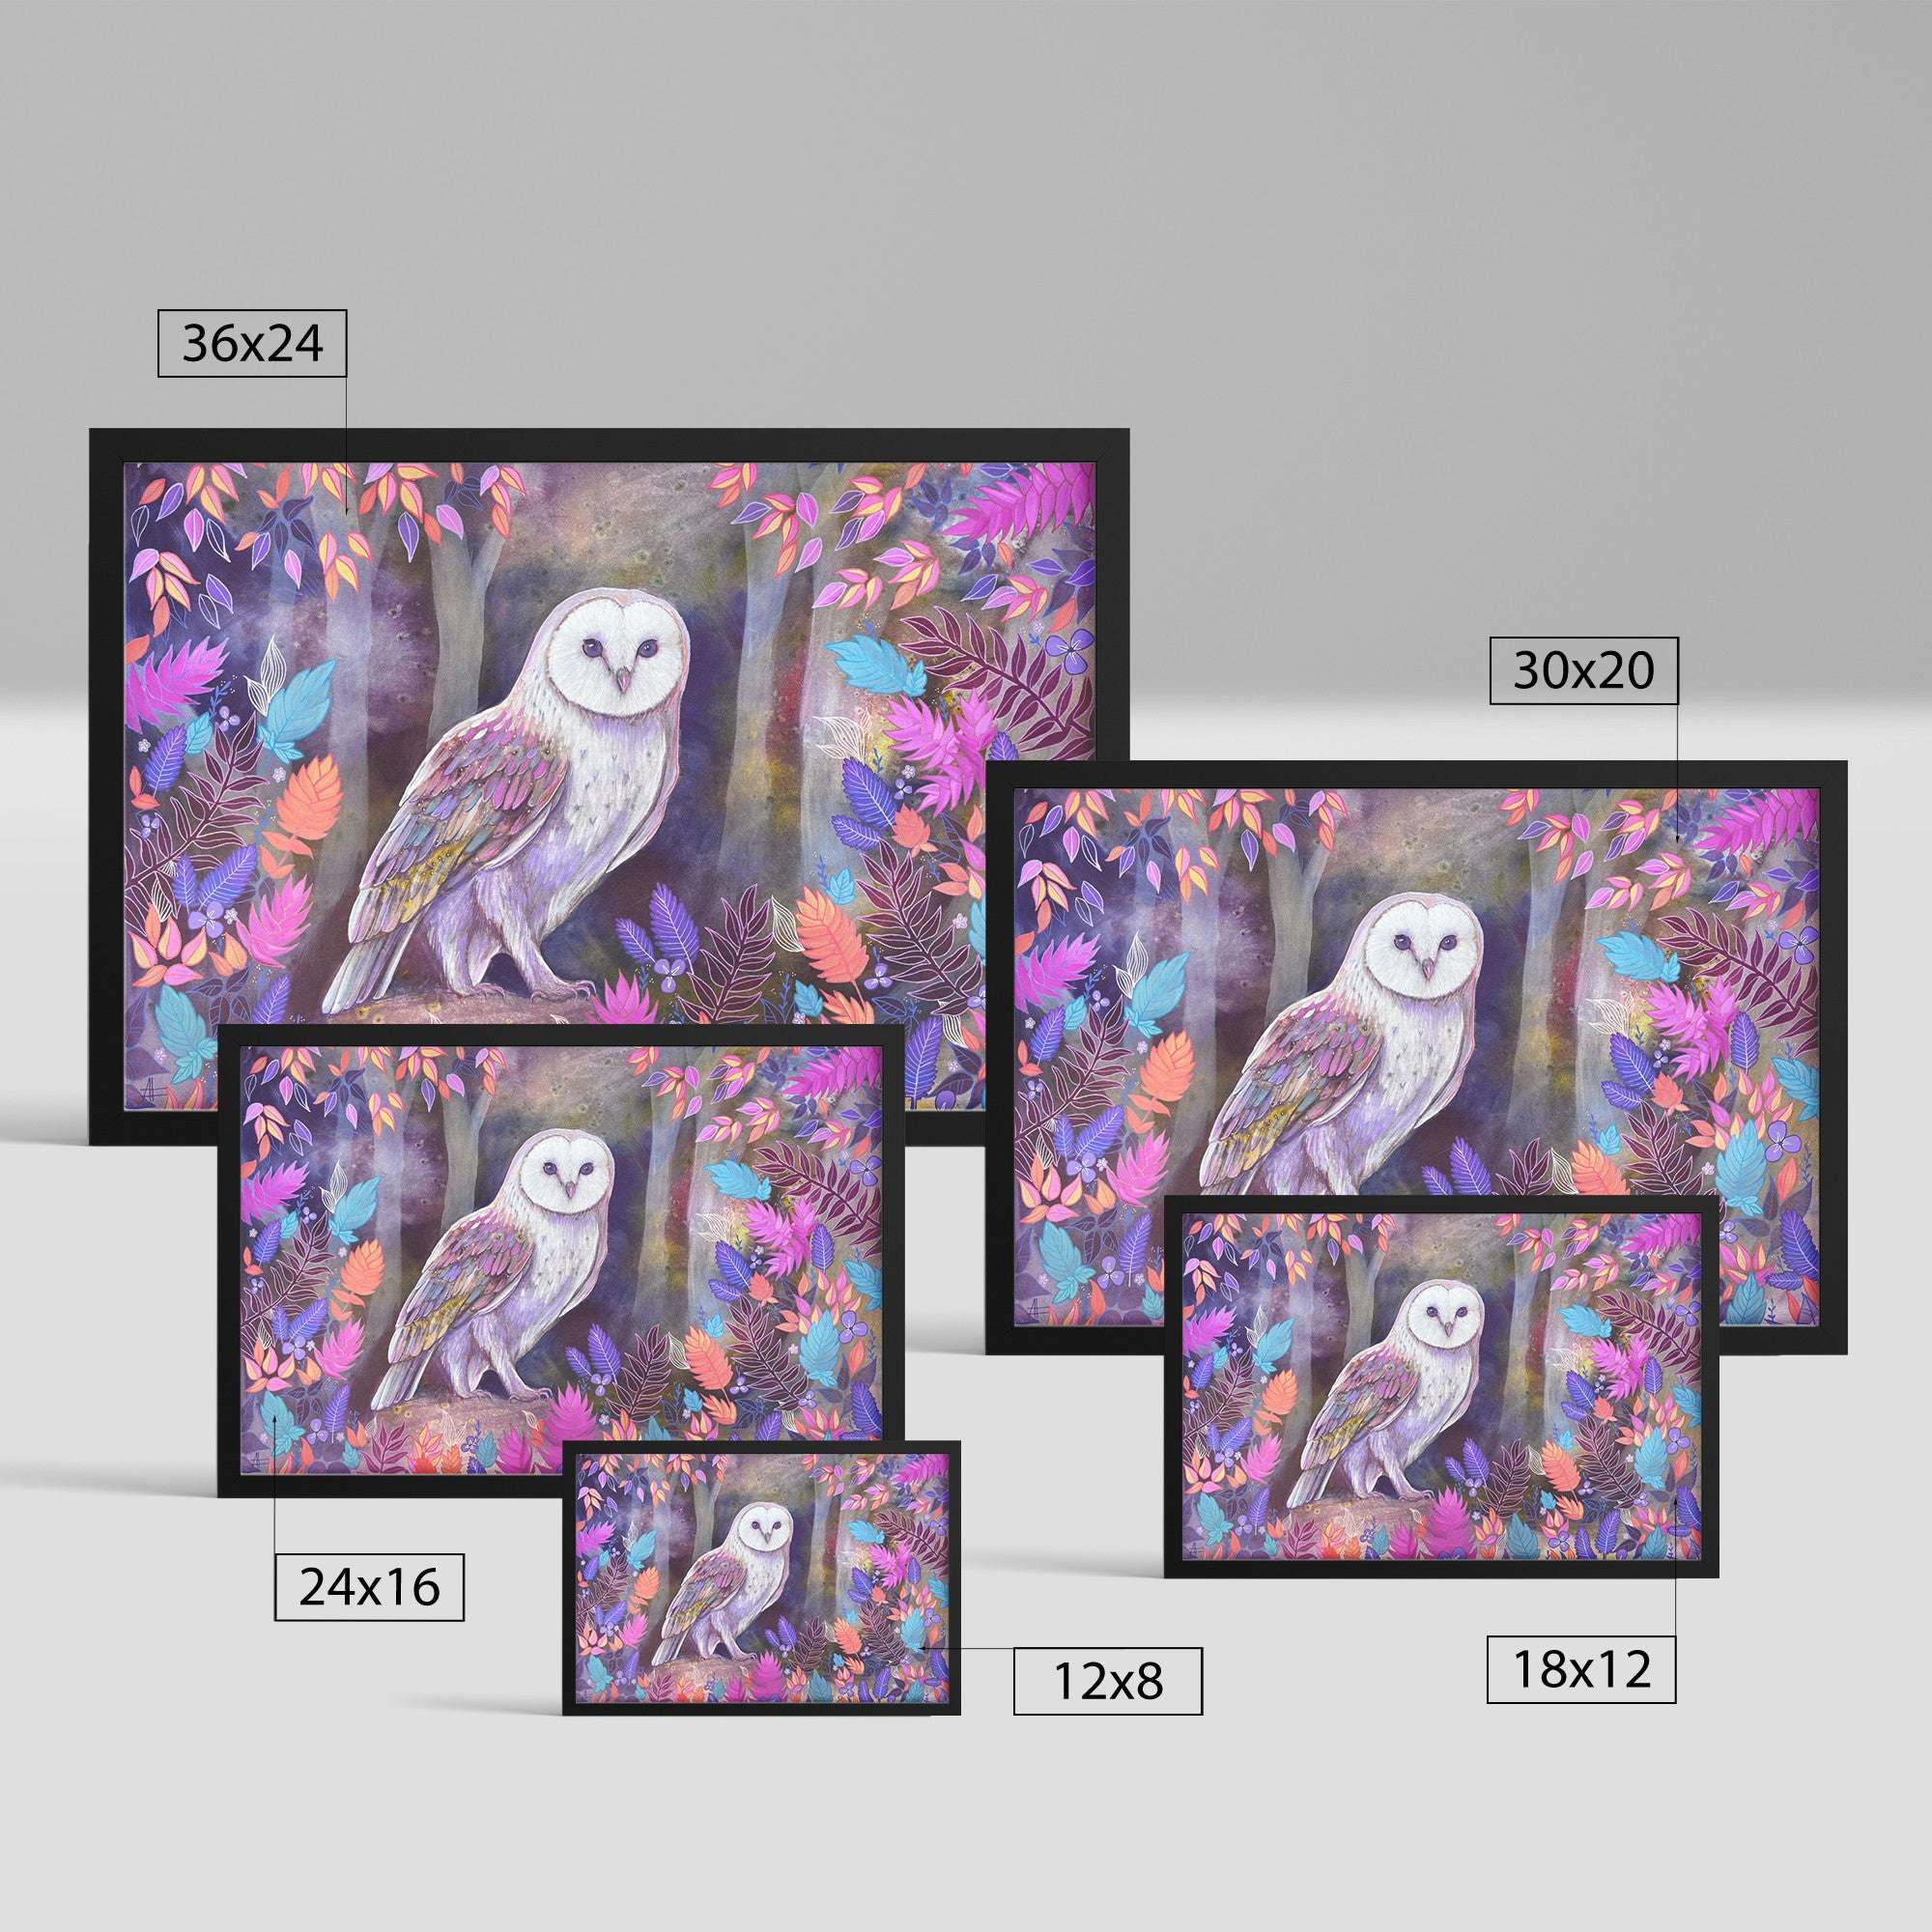 A collection of Framed Owl Art Prints featuring a white barn owl perched on a branch amid colorful leaves, available in various sizes.